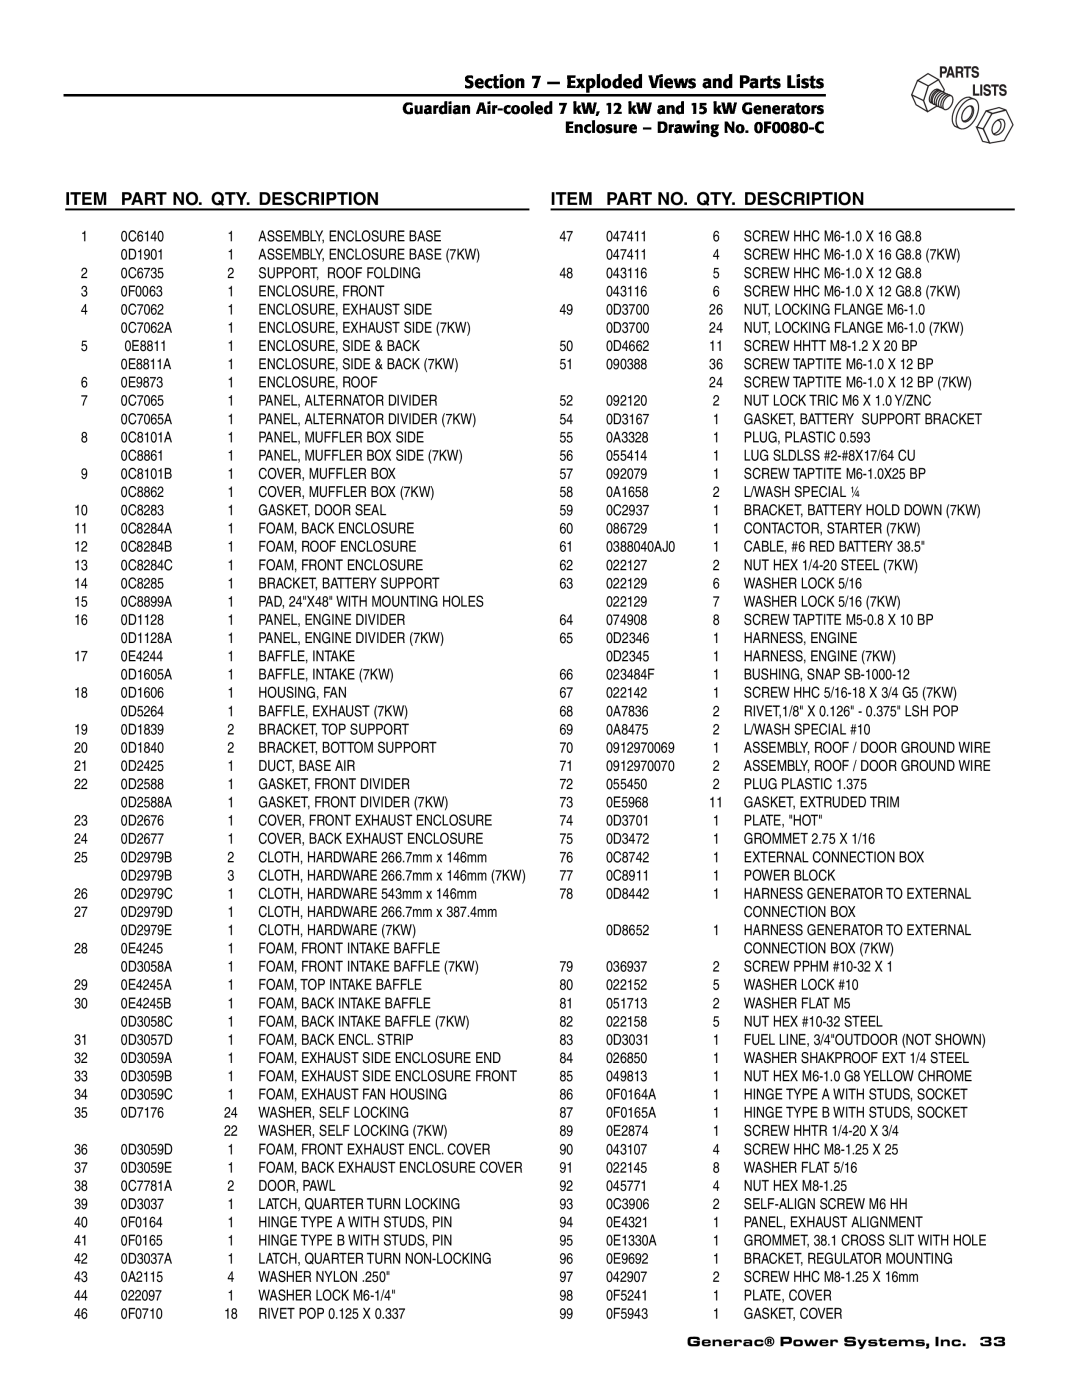 Guardian Technologies 04758-2, 04759-2, 04760-2 owner manual Exploded Views and Parts Lists, Part No. Qty. Description 